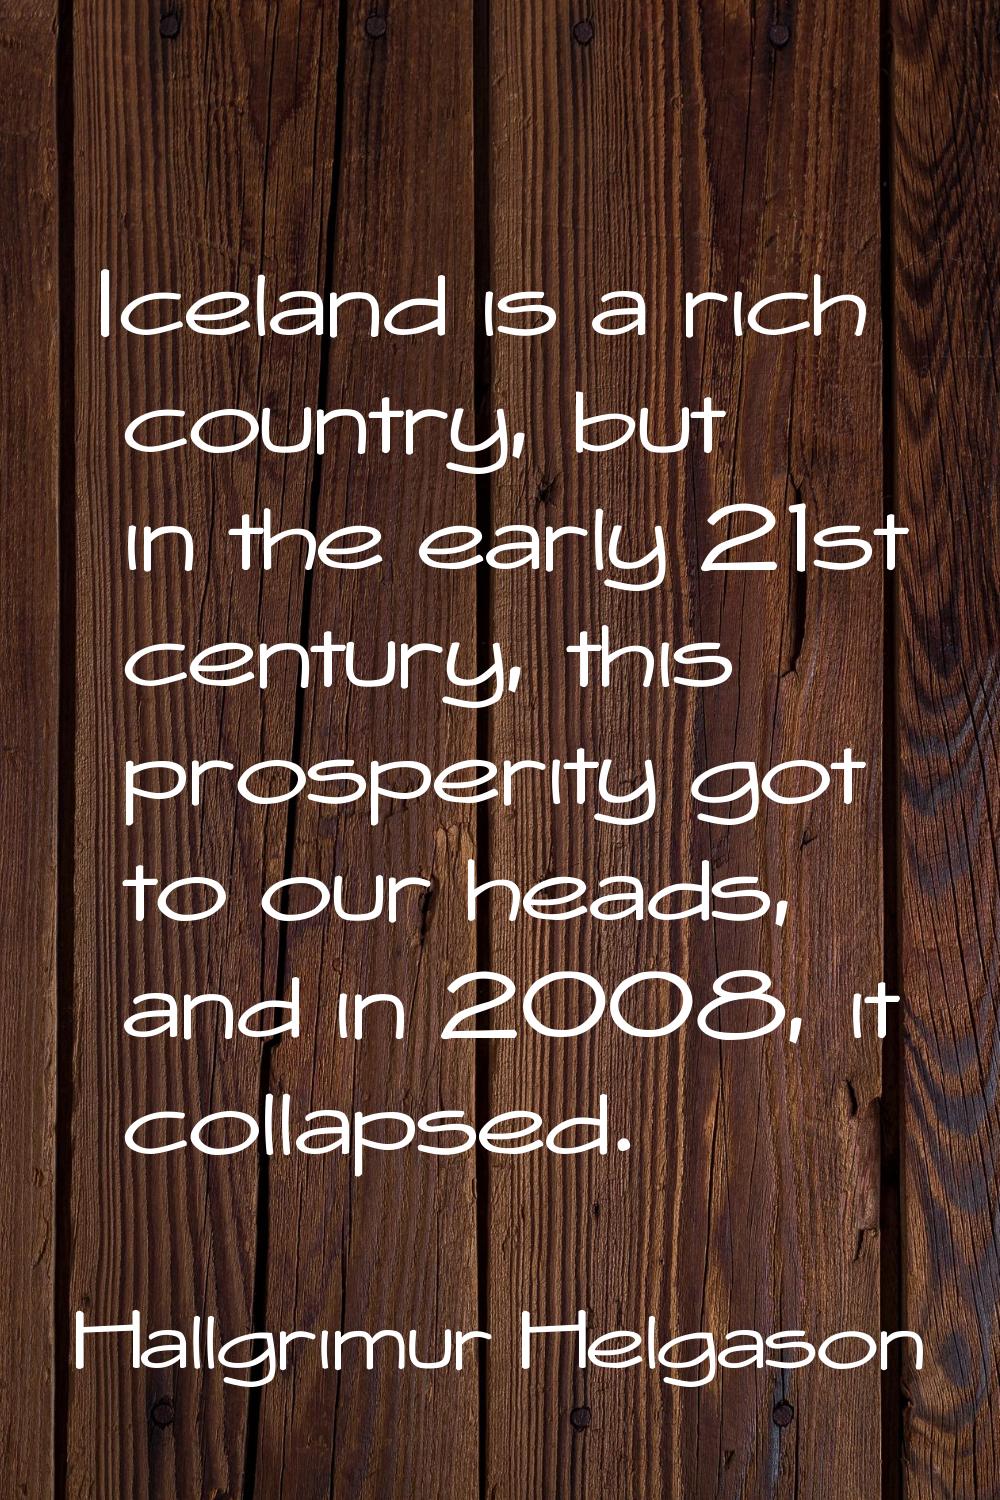 Iceland is a rich country, but in the early 21st century, this prosperity got to our heads, and in 